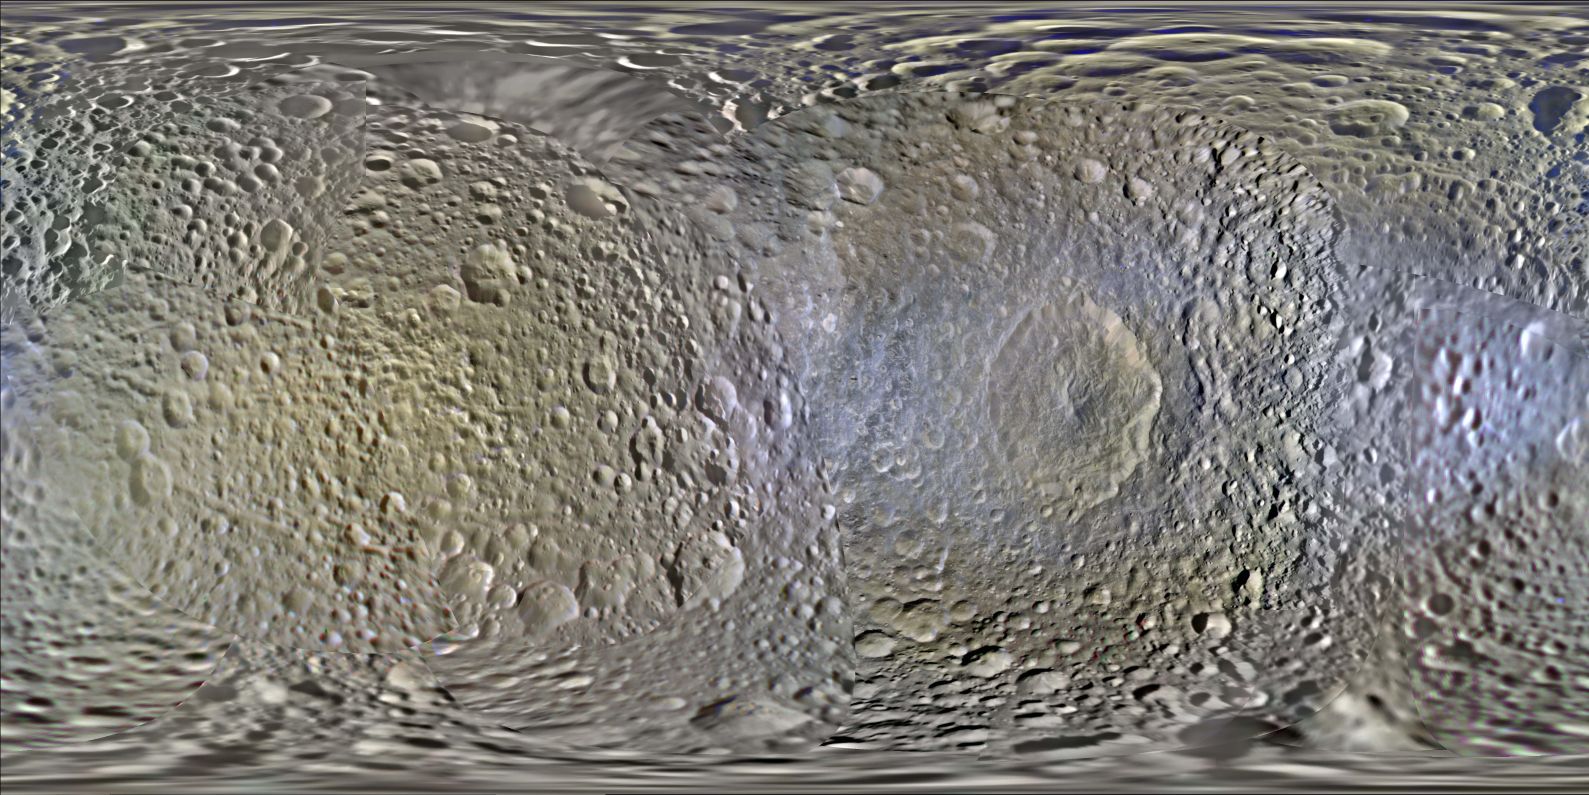 A high-resolution color global map of Saturn's moon Mimas, based on imaging data from NASA's Cassini spacecraft. A set of new global maps of Saturn's largest icy moons reveal the latters' landscapes in unprecedented detail. Image Credit: NASA/JPL-Caltech/SSI/LPI